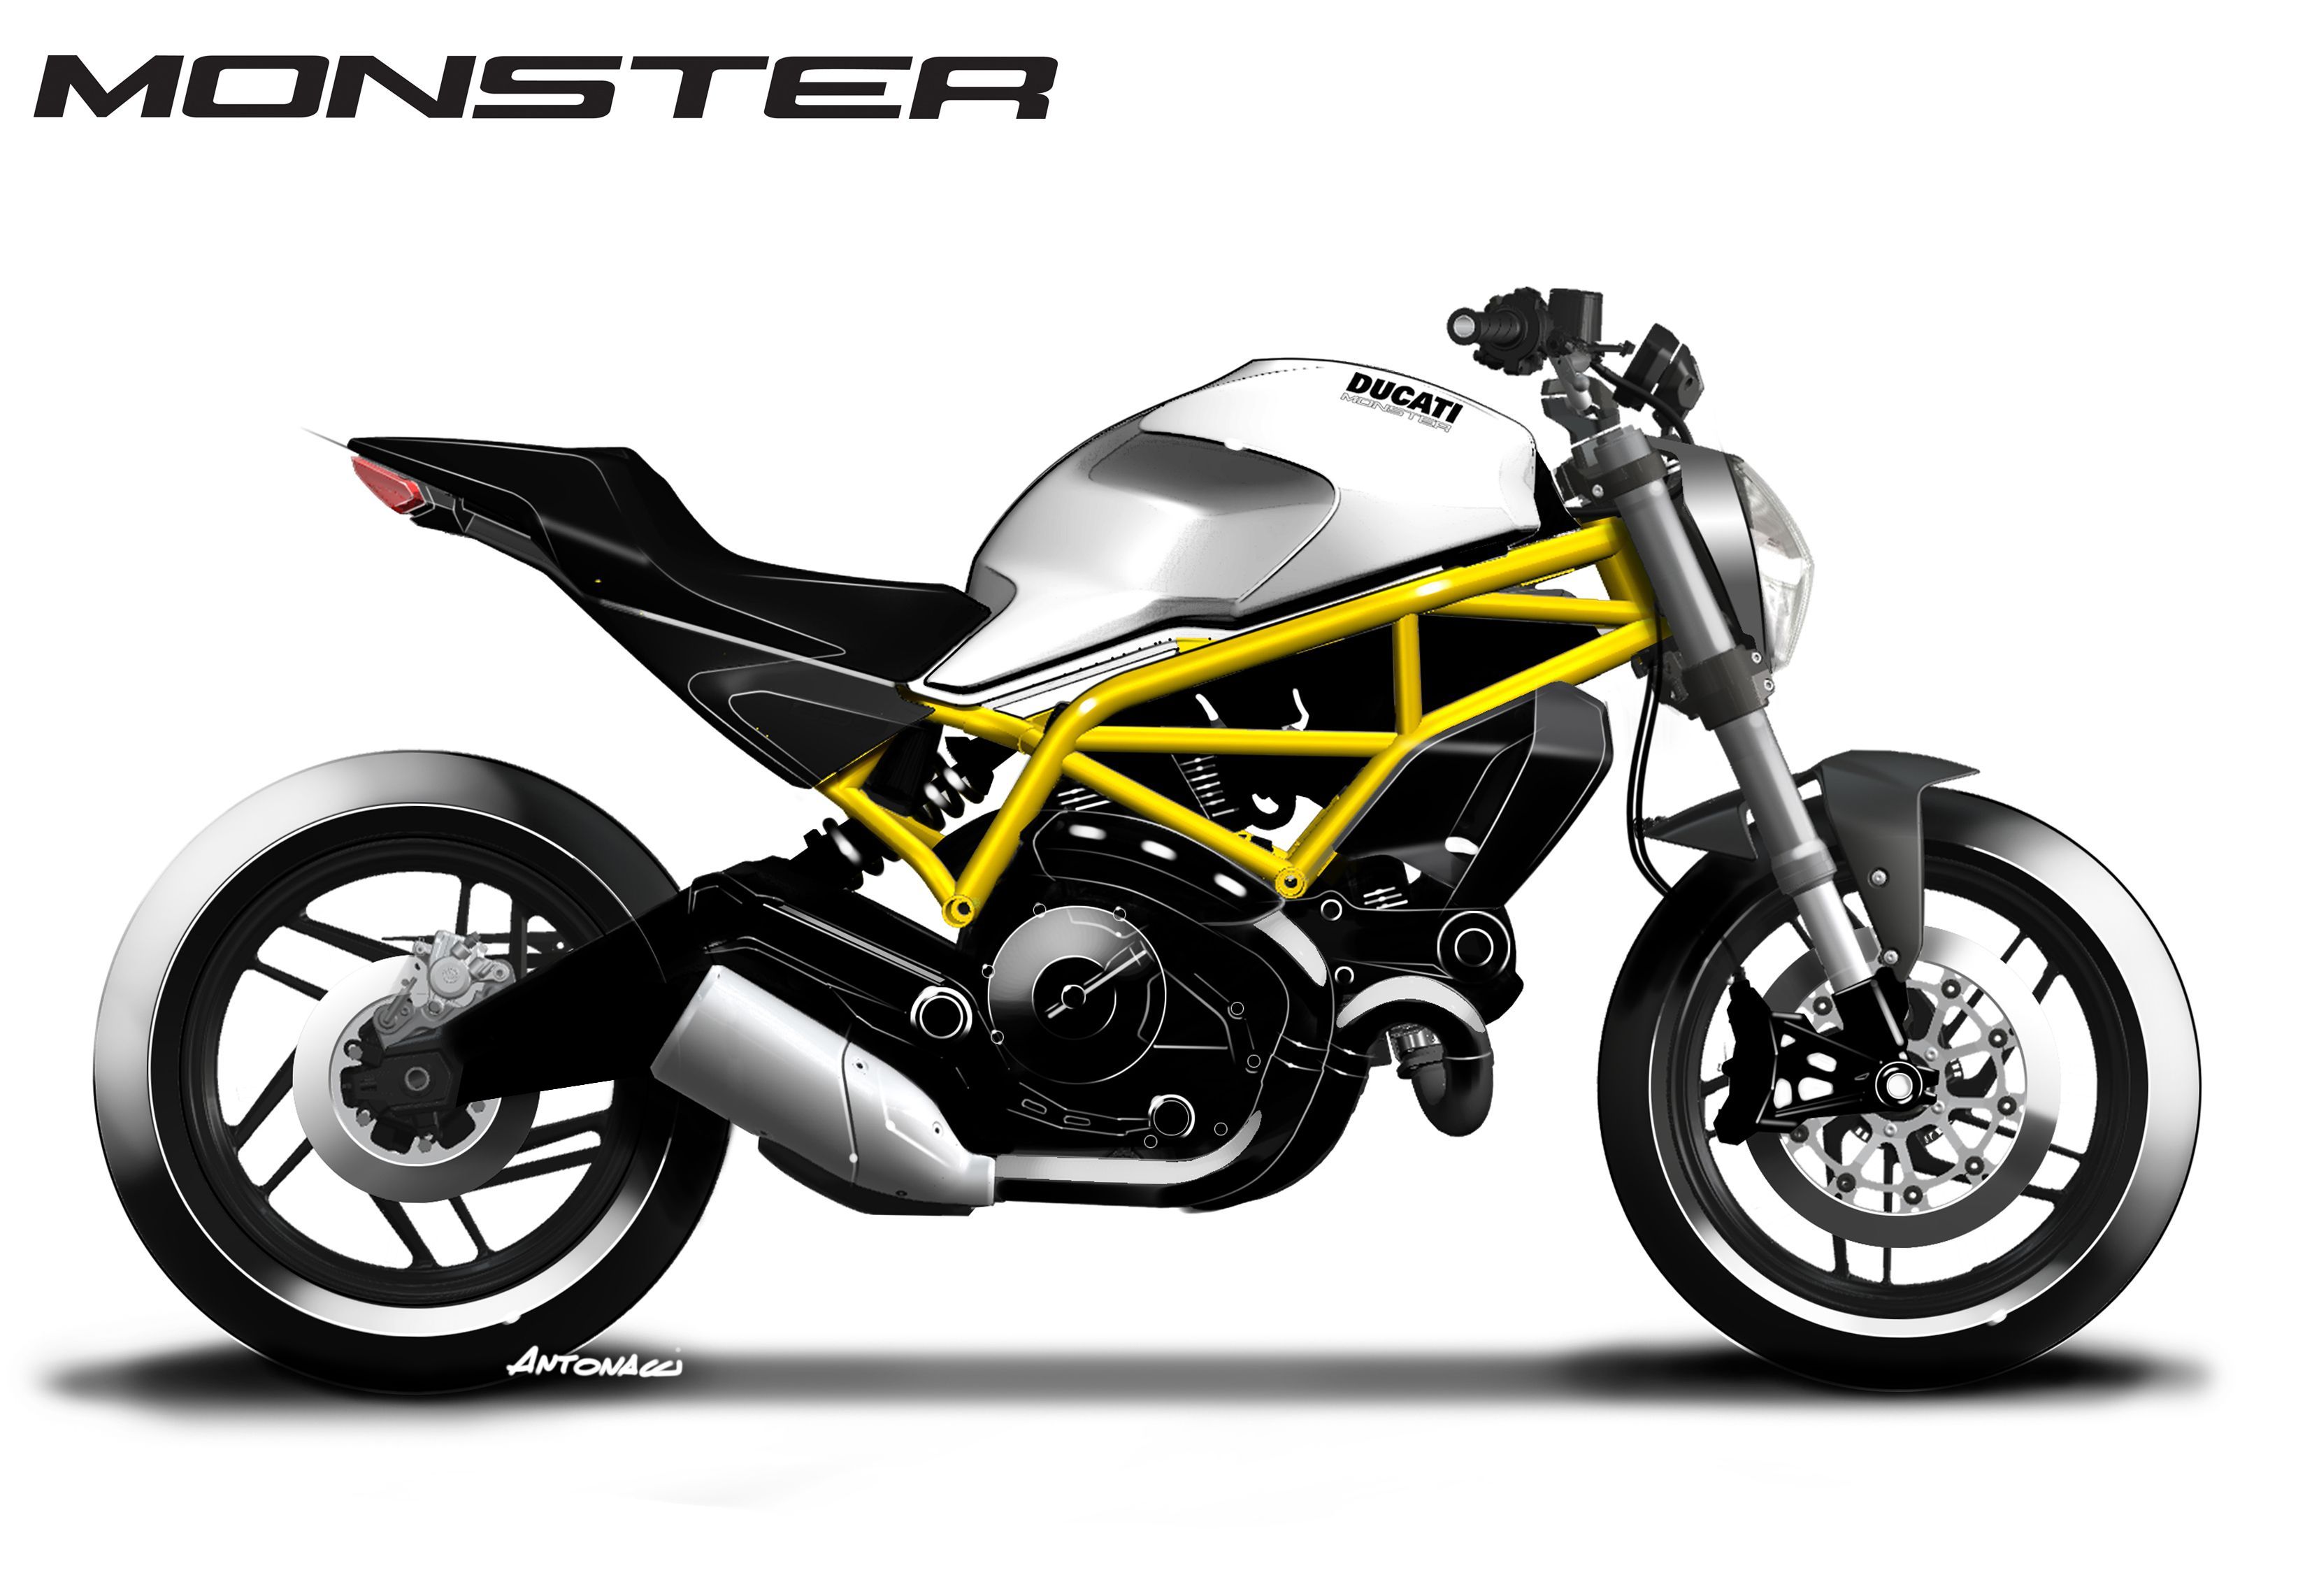 Design sketch of the Monster 797 shows it's lines